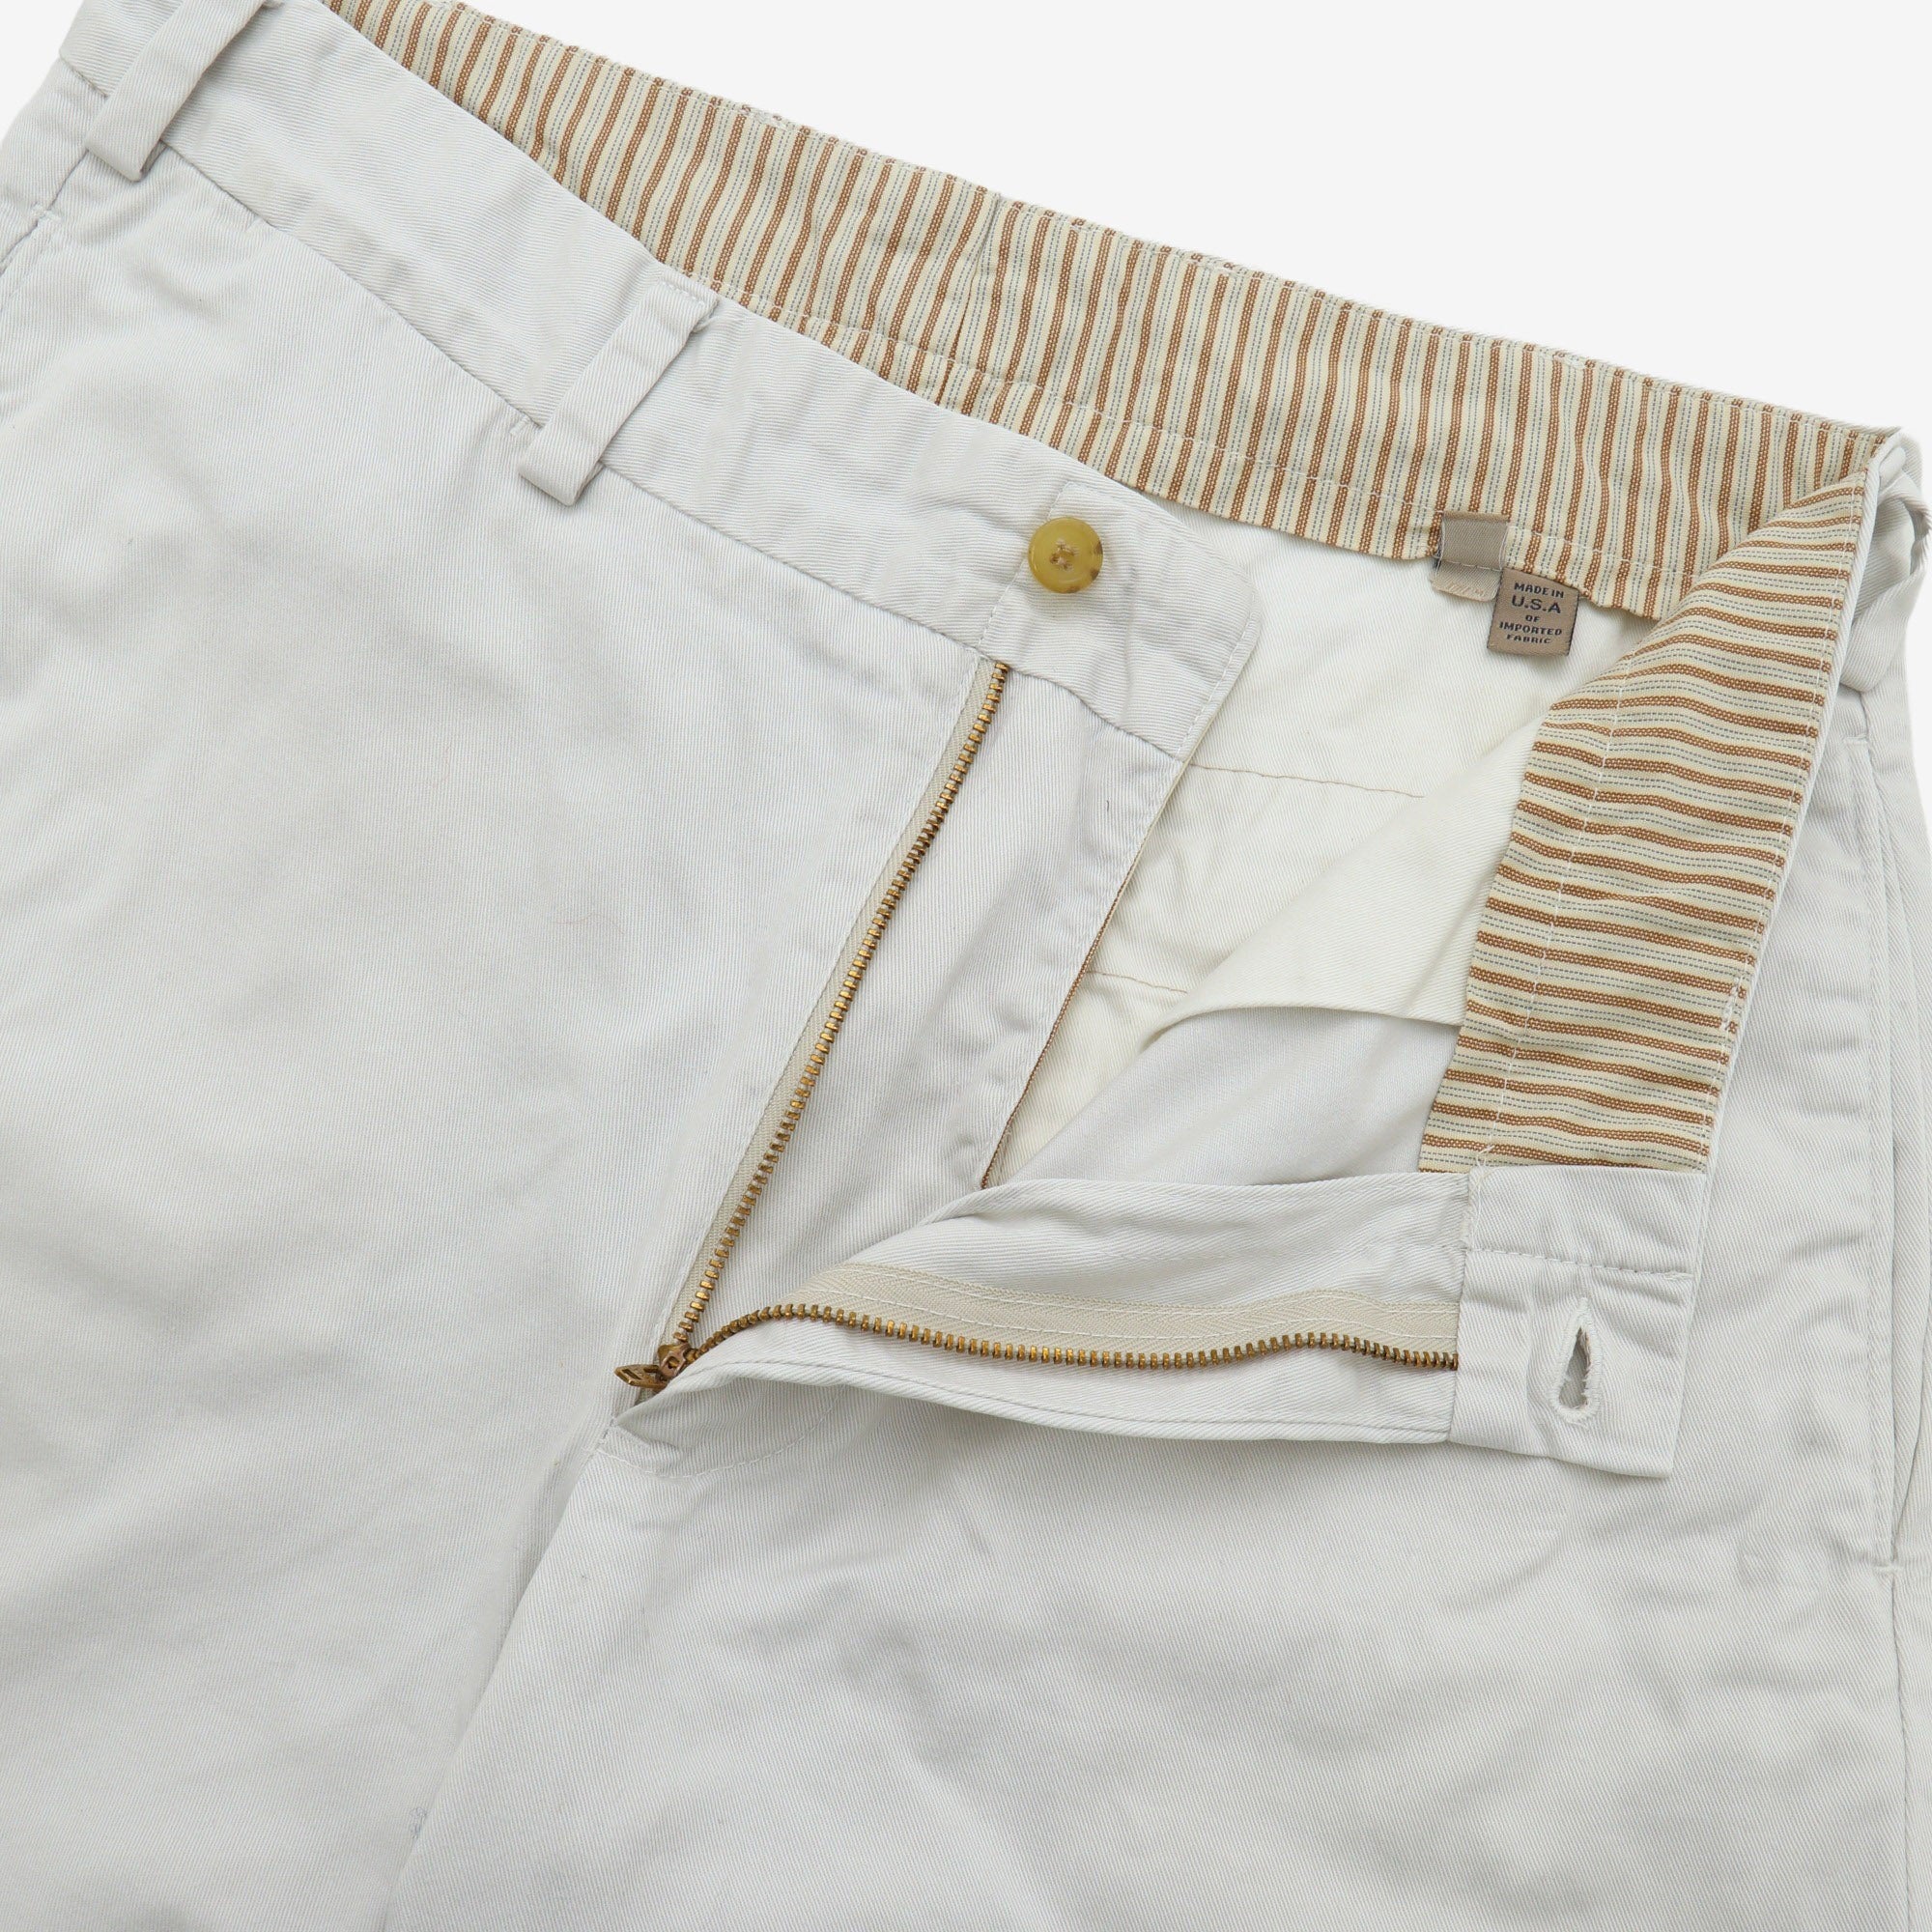 Classic Fit Chino Trousers